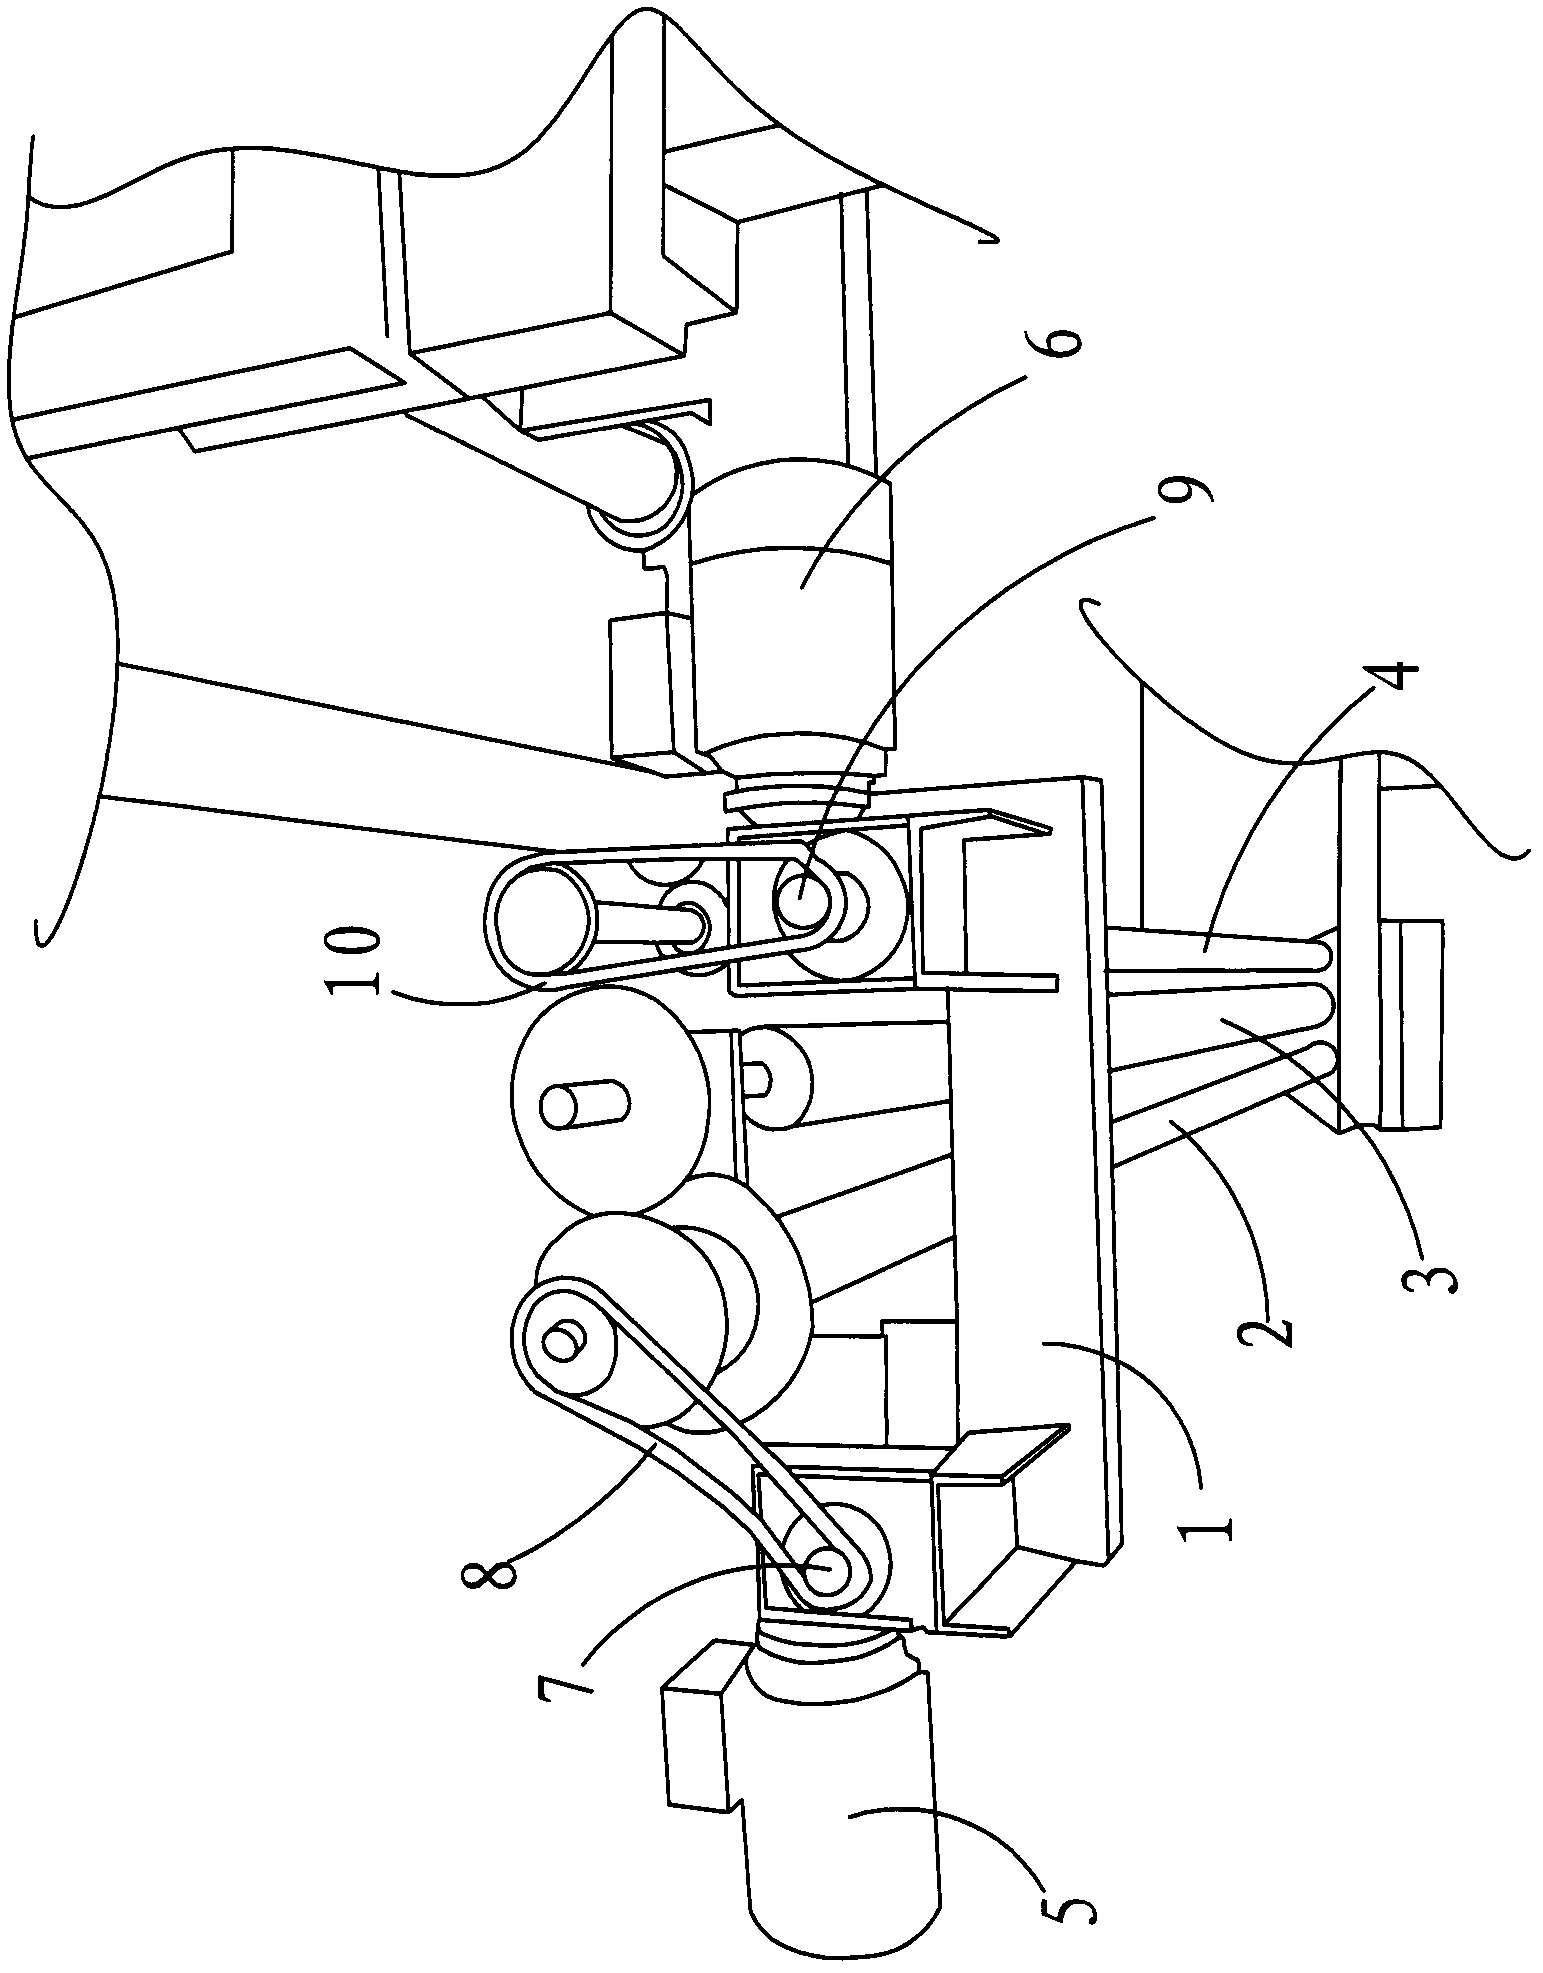 Controlled tension mechanism for looms